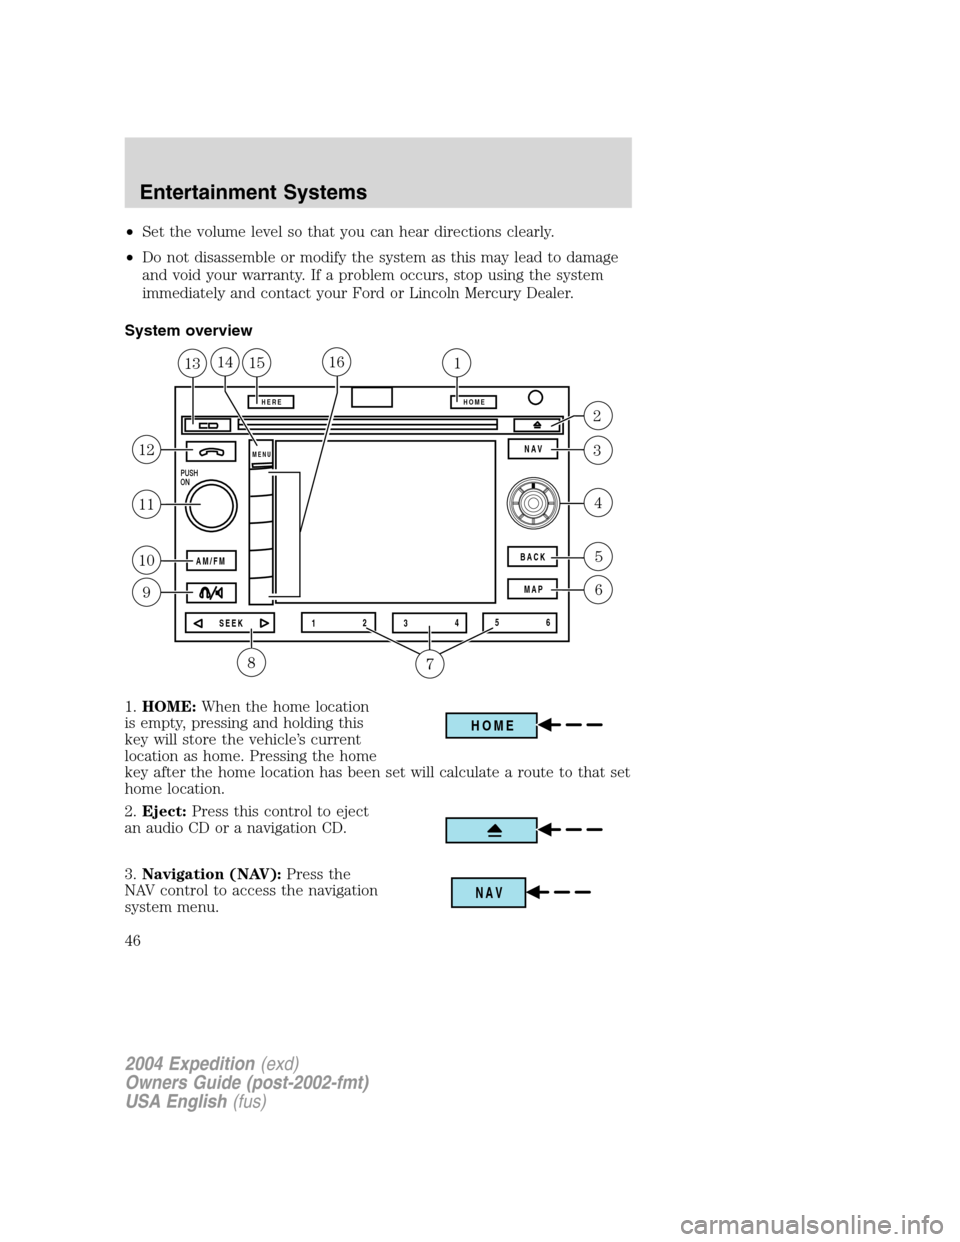 FORD EXPEDITION 2004 2.G Service Manual •Set the volume level so that you can hear directions clearly.
•Do not disassemble or modify the system as this may lead to damage
and void your warranty. If a problem occurs, stop using the syste